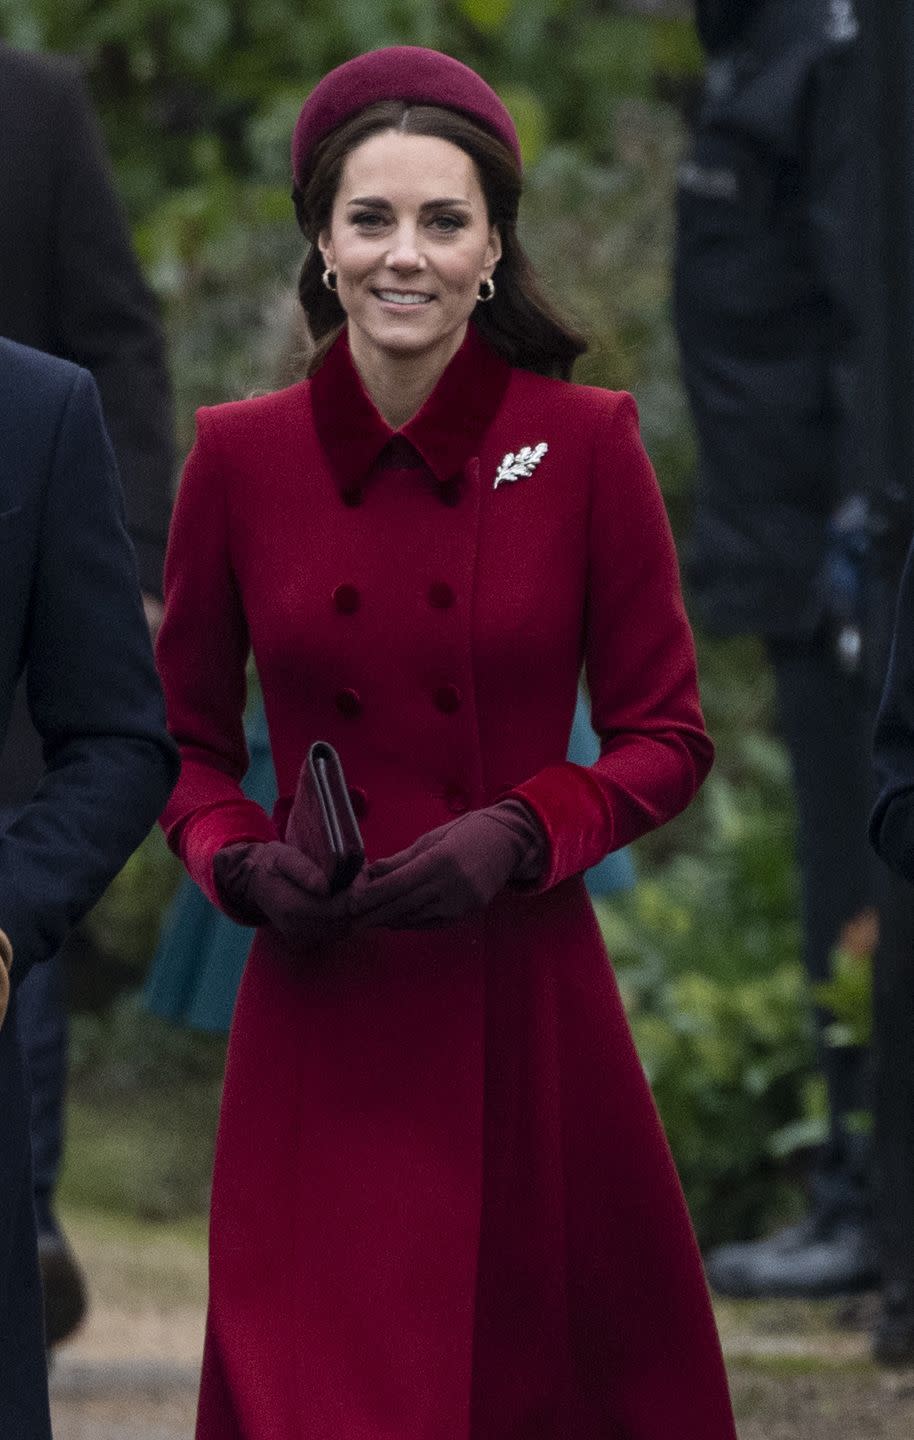 <p>Burgundy must be a royal fave, ’cause Kate wore this merlot coat and matching hat for Christmas in Sandringham. P.S. Those gloves. I want. </p>